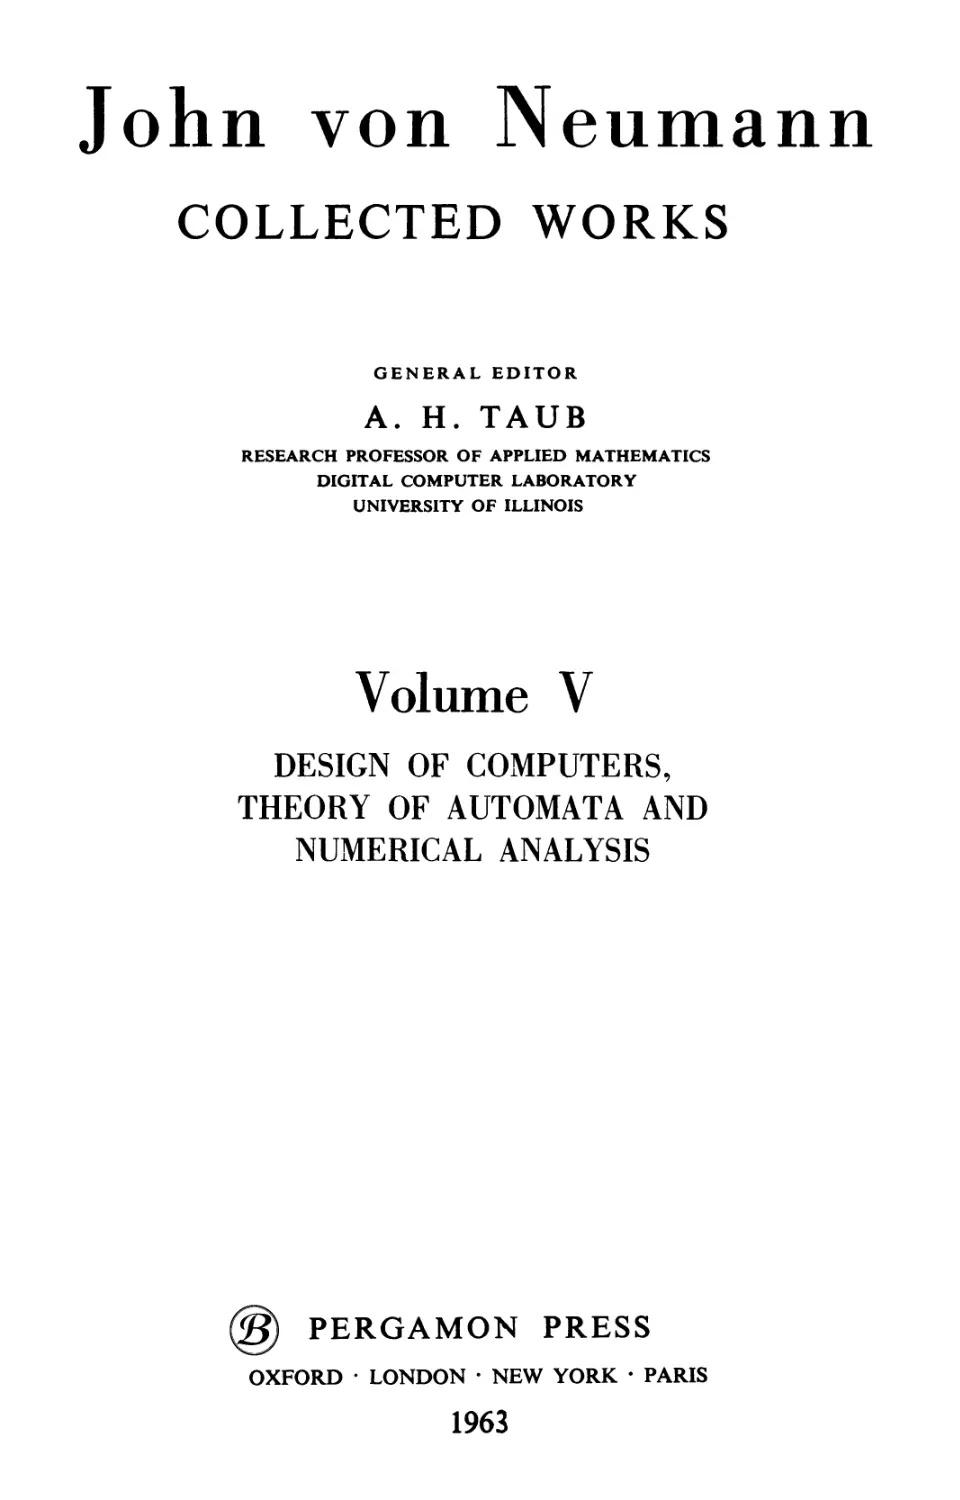 J.Von Neumann. Collected works vol 5. Design of Computers,Theory of Automata and Numerical AnalysisCopyright